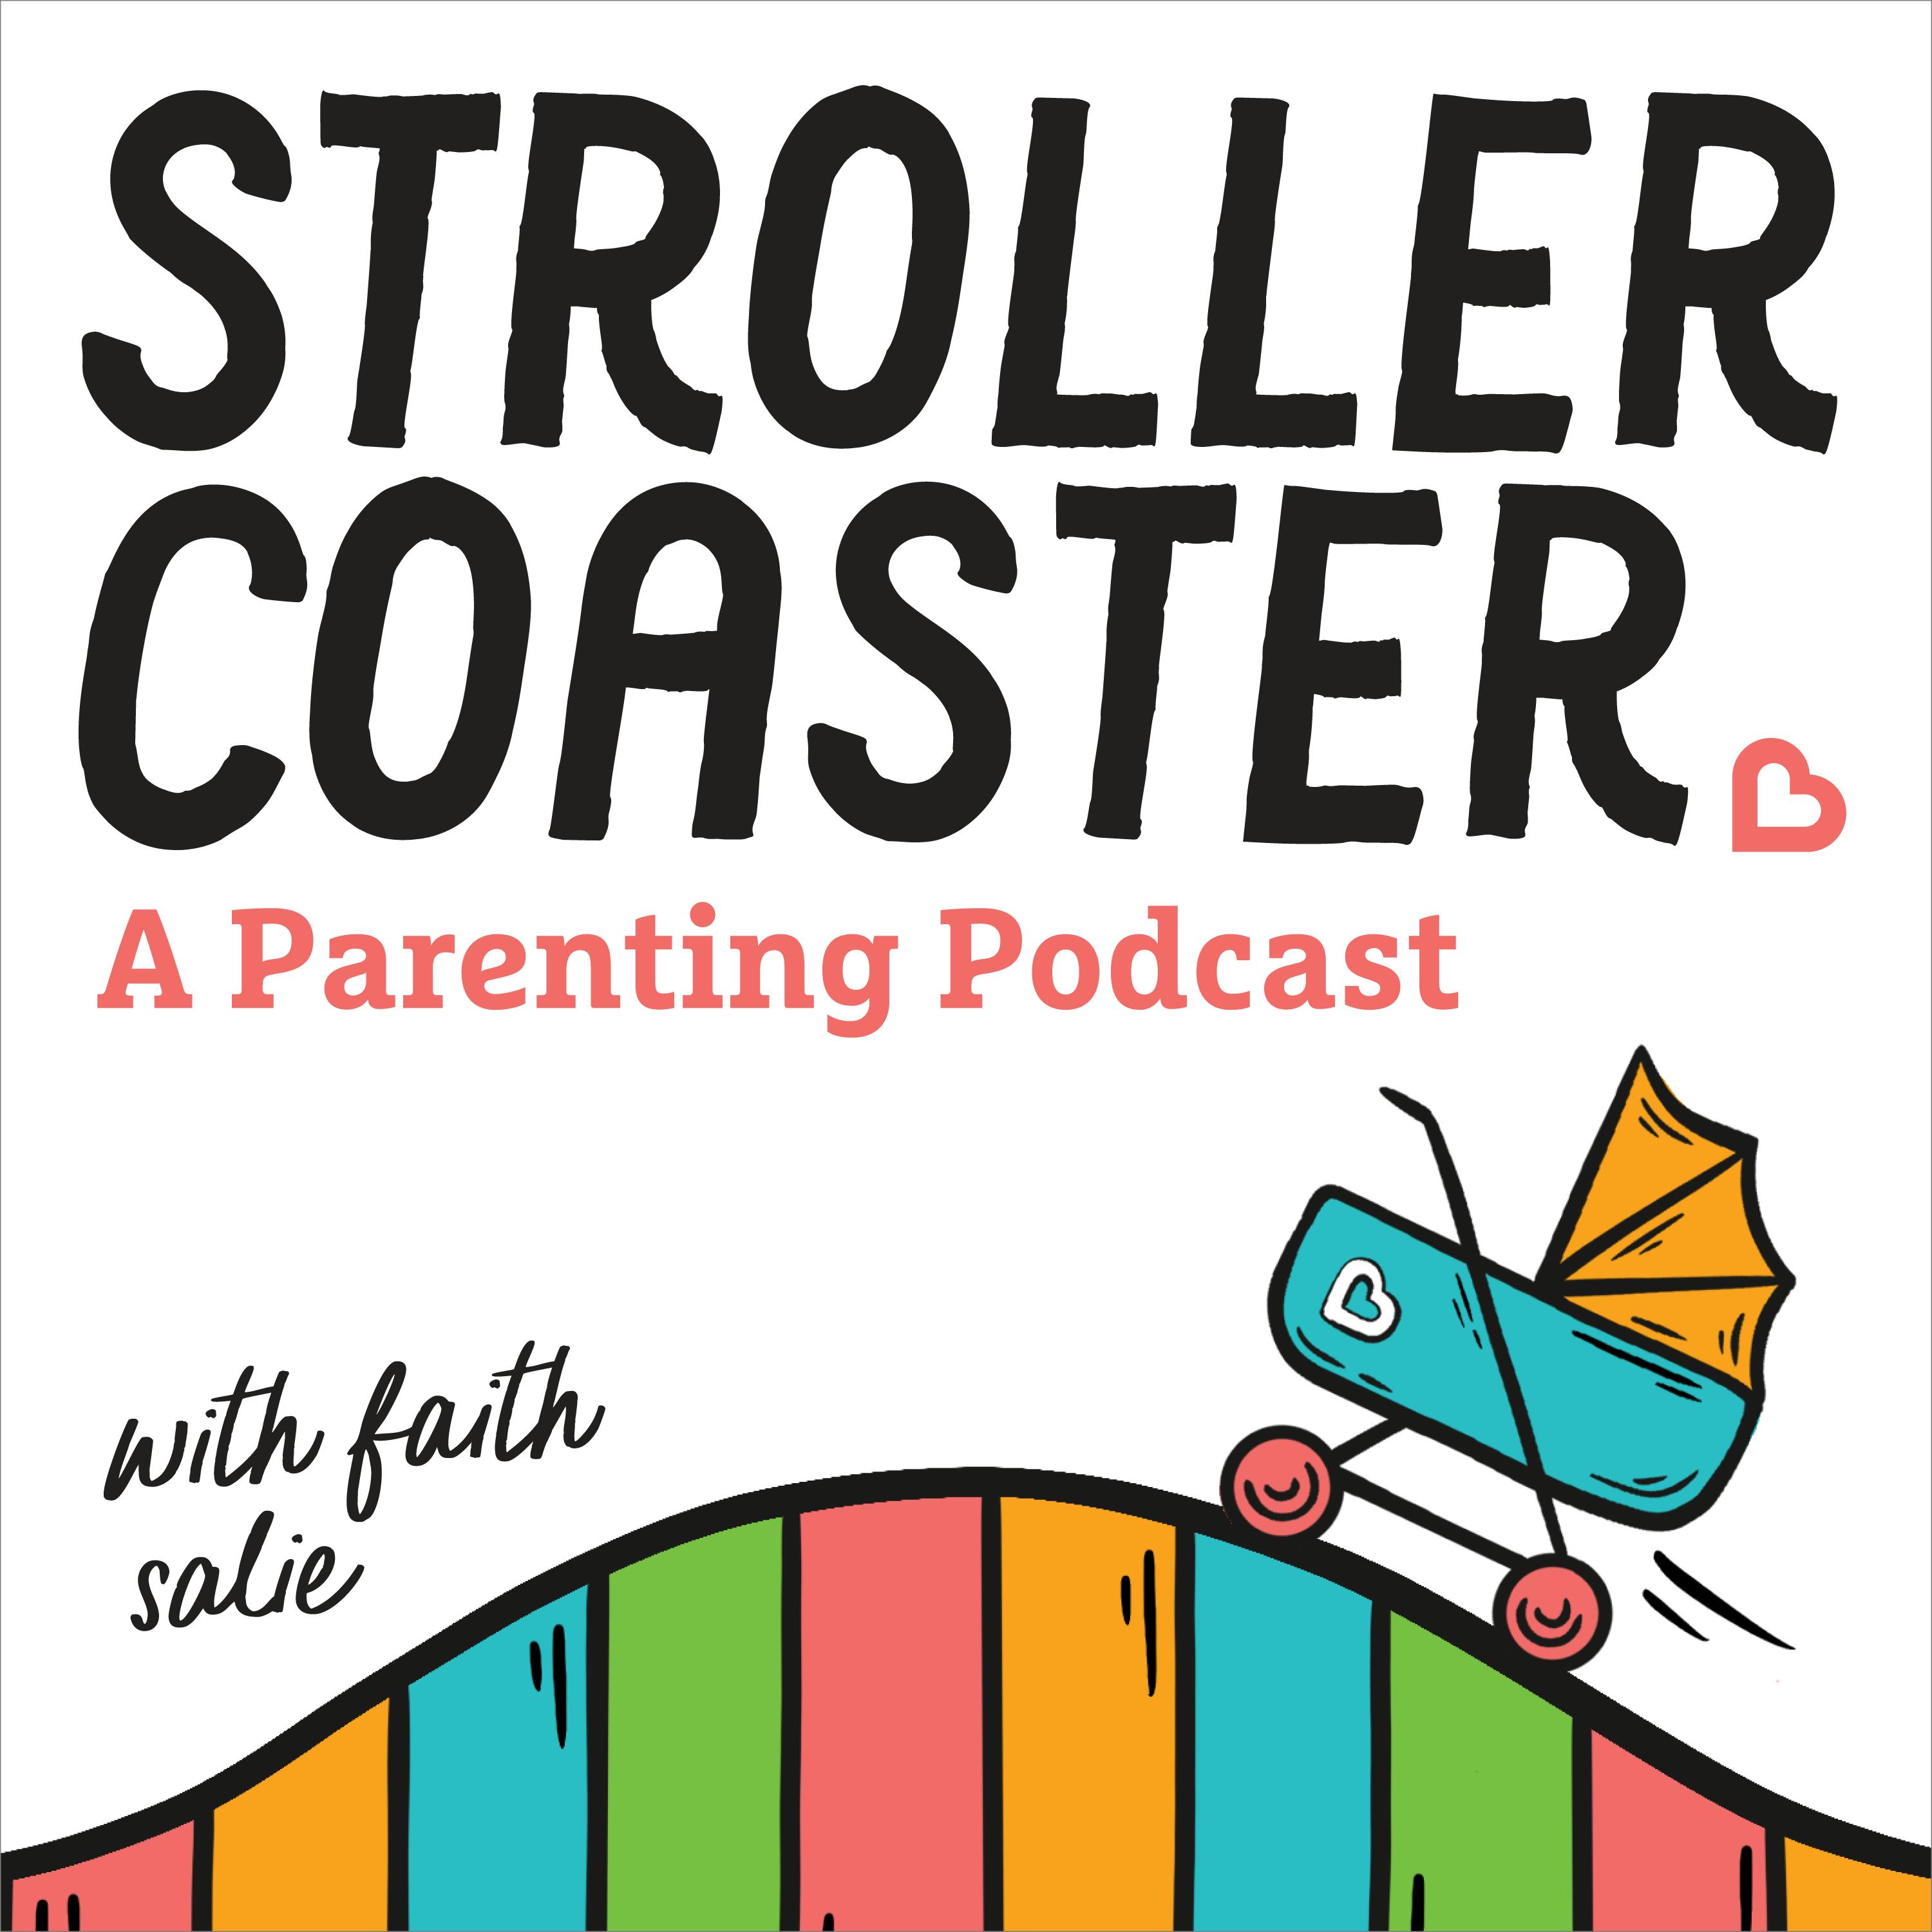 StrollerCoaster: A Parenting Podcast | Munchkin